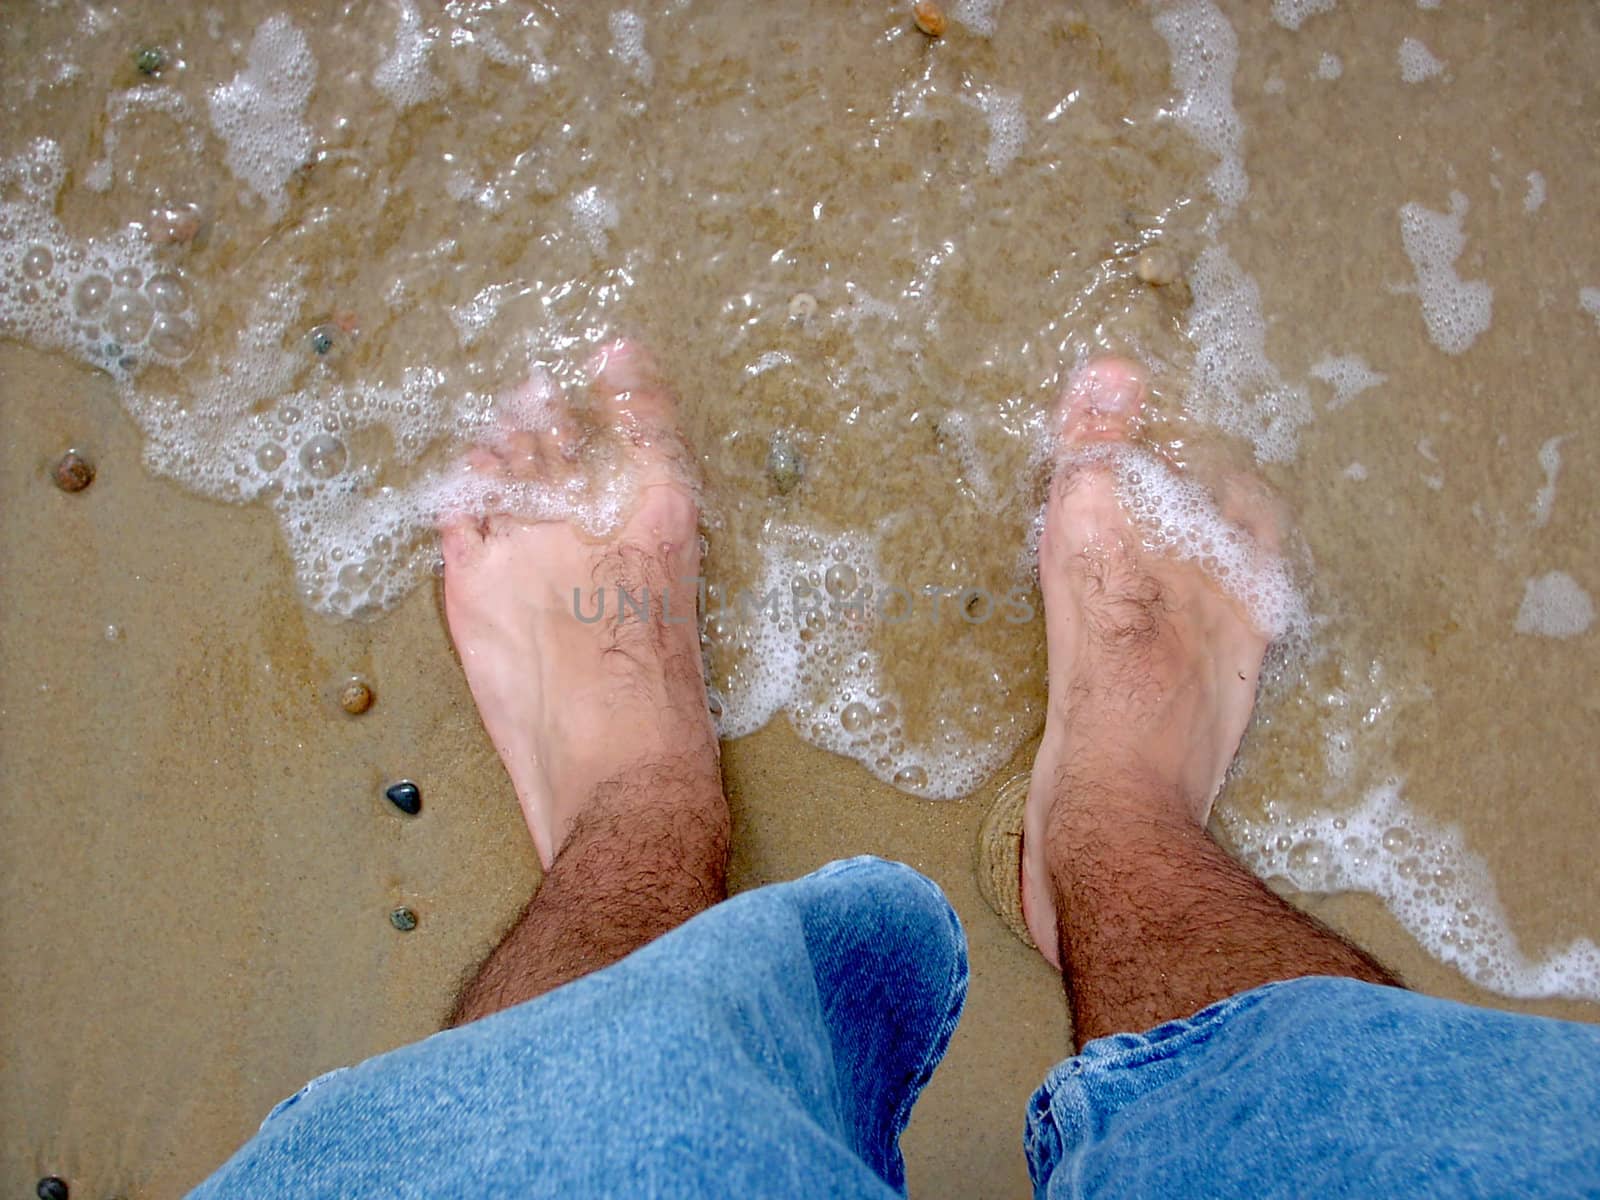 Hairy, Cold, Wet Feet by graficallyminded